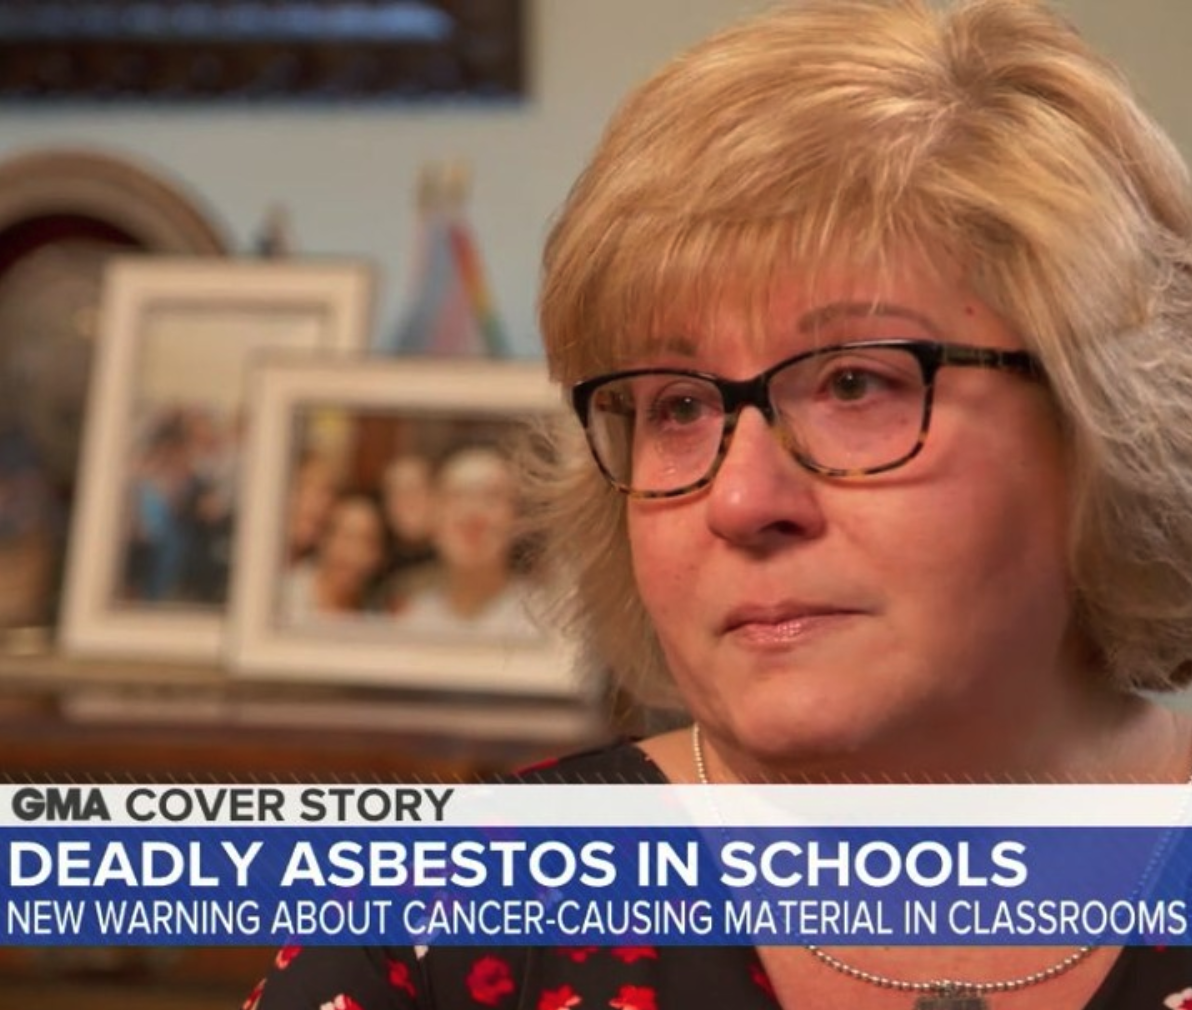 Asbestos in Philadelphia Schools Reminds Us All to be Thankful Around the Holidays